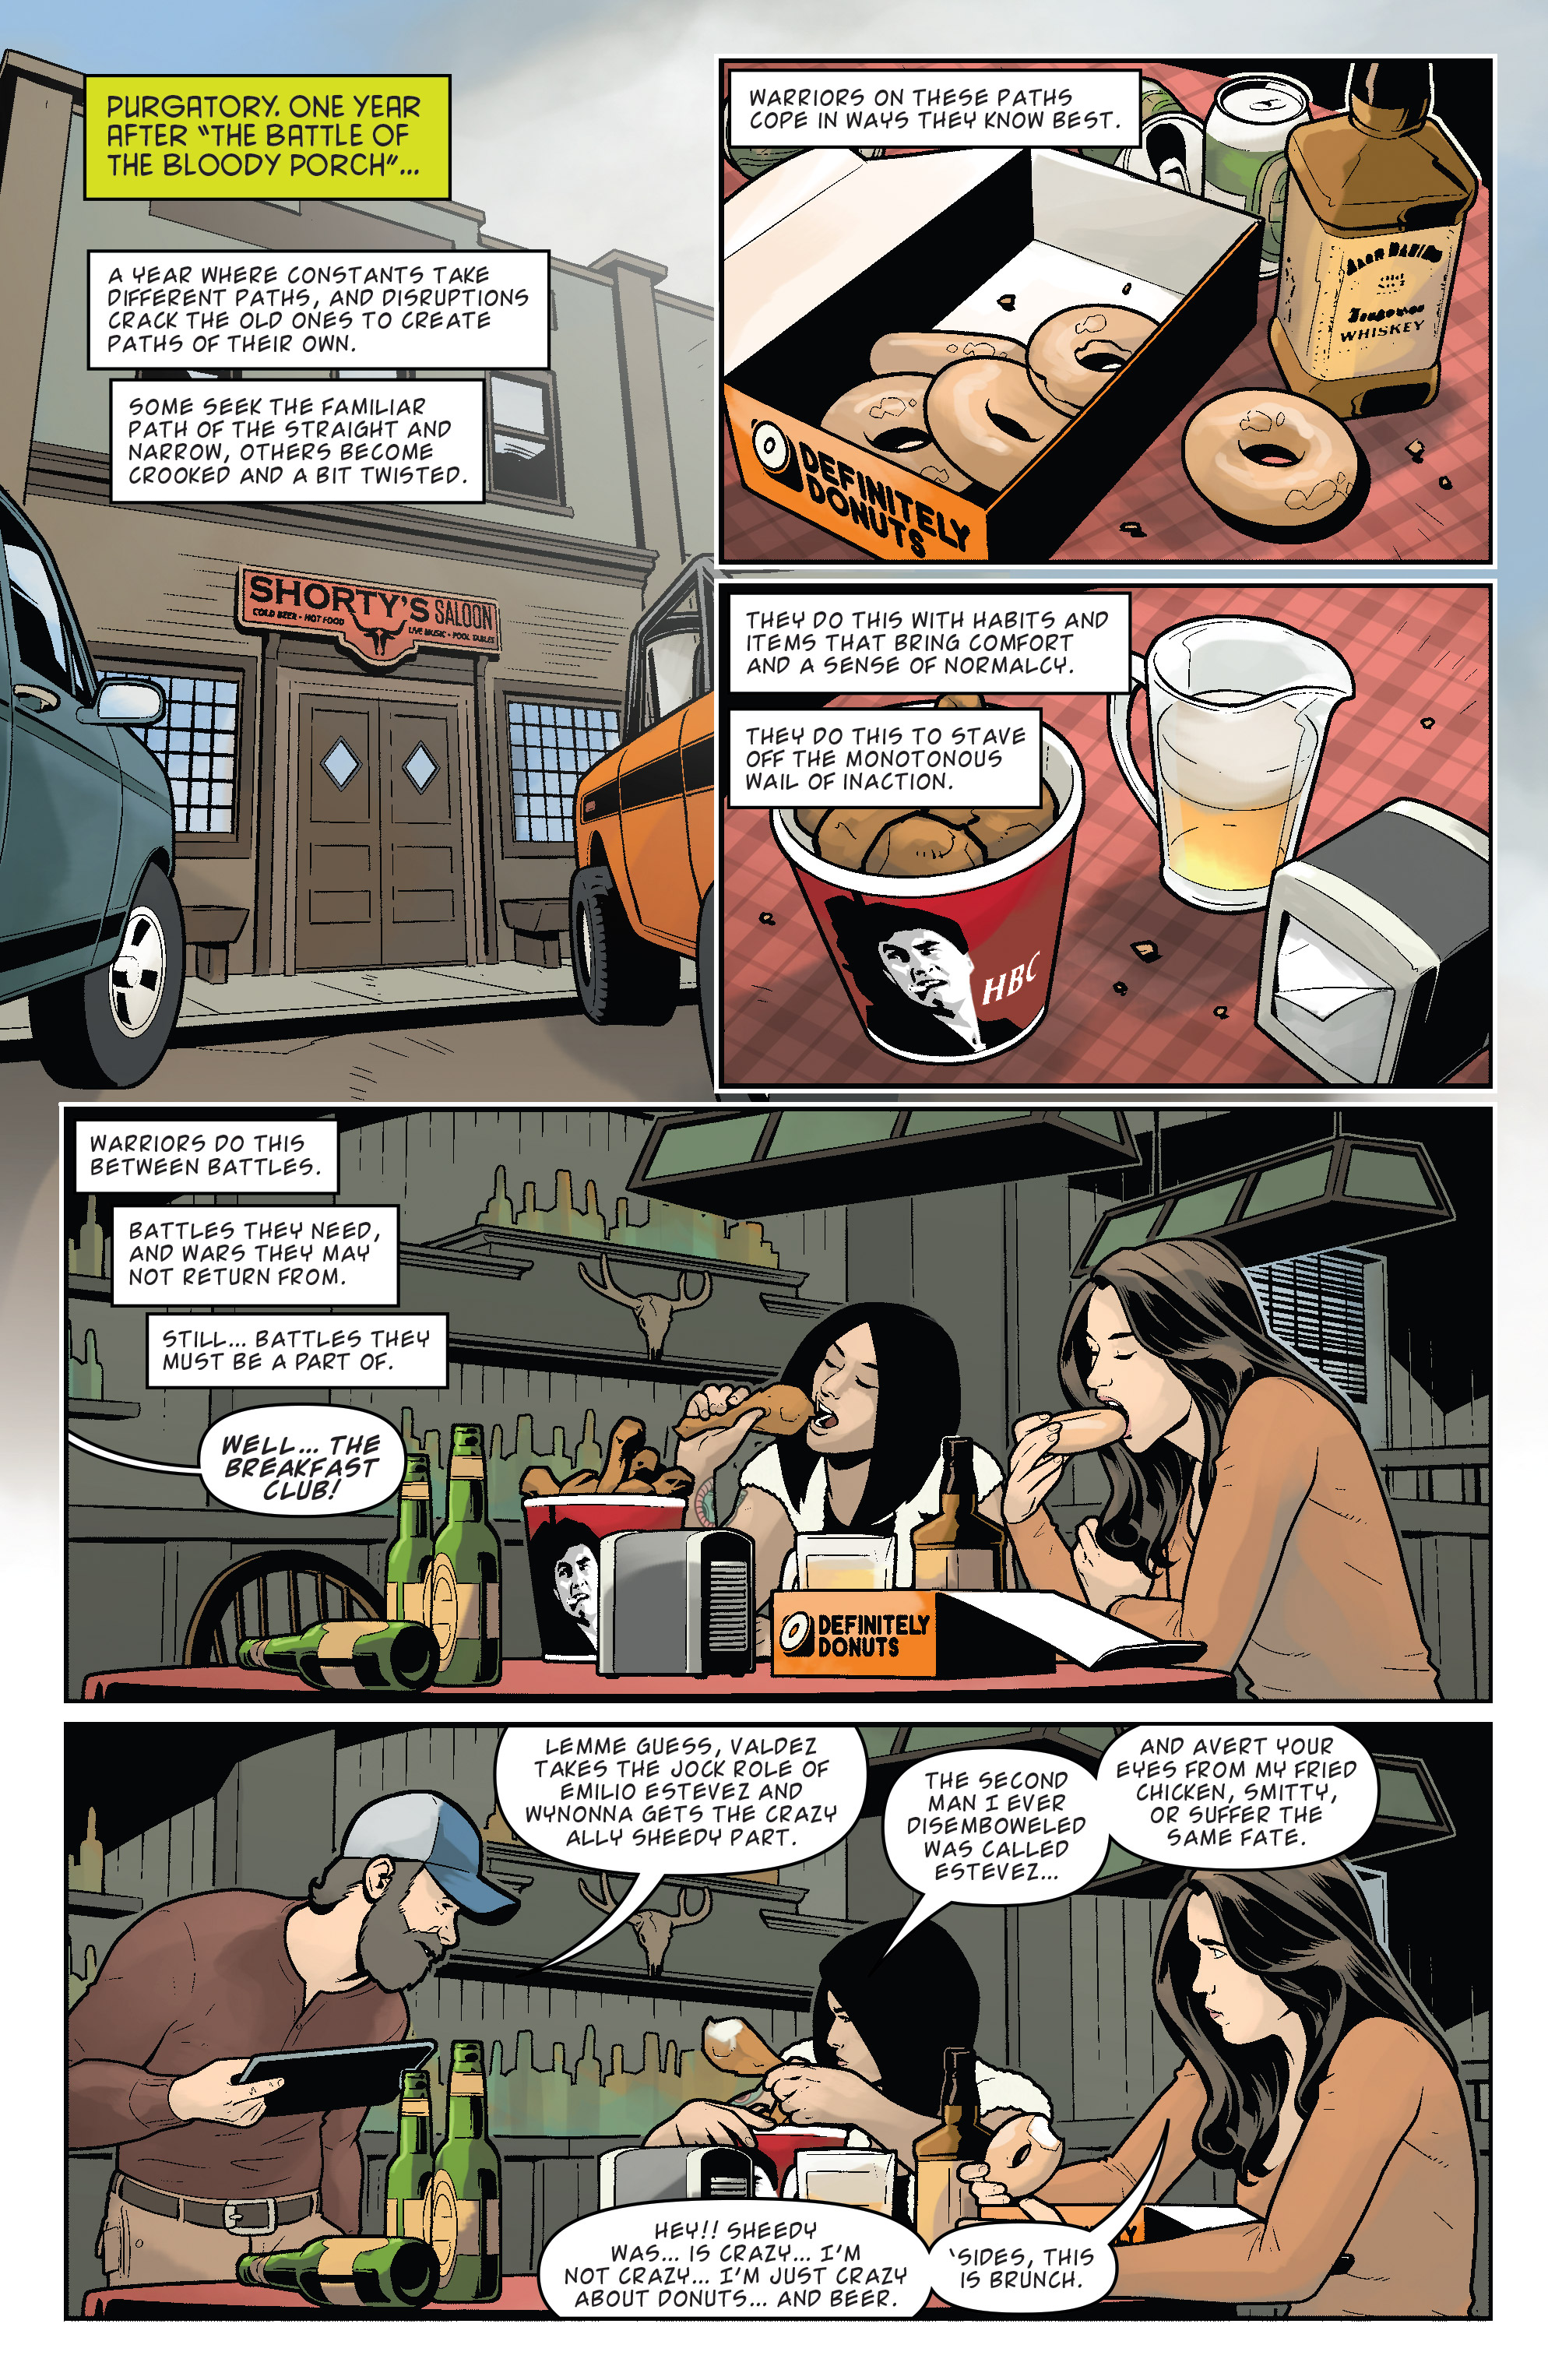 Wynonna Earp: Bad Day at Black Rock (2019-): Chapter 1 - Page 5